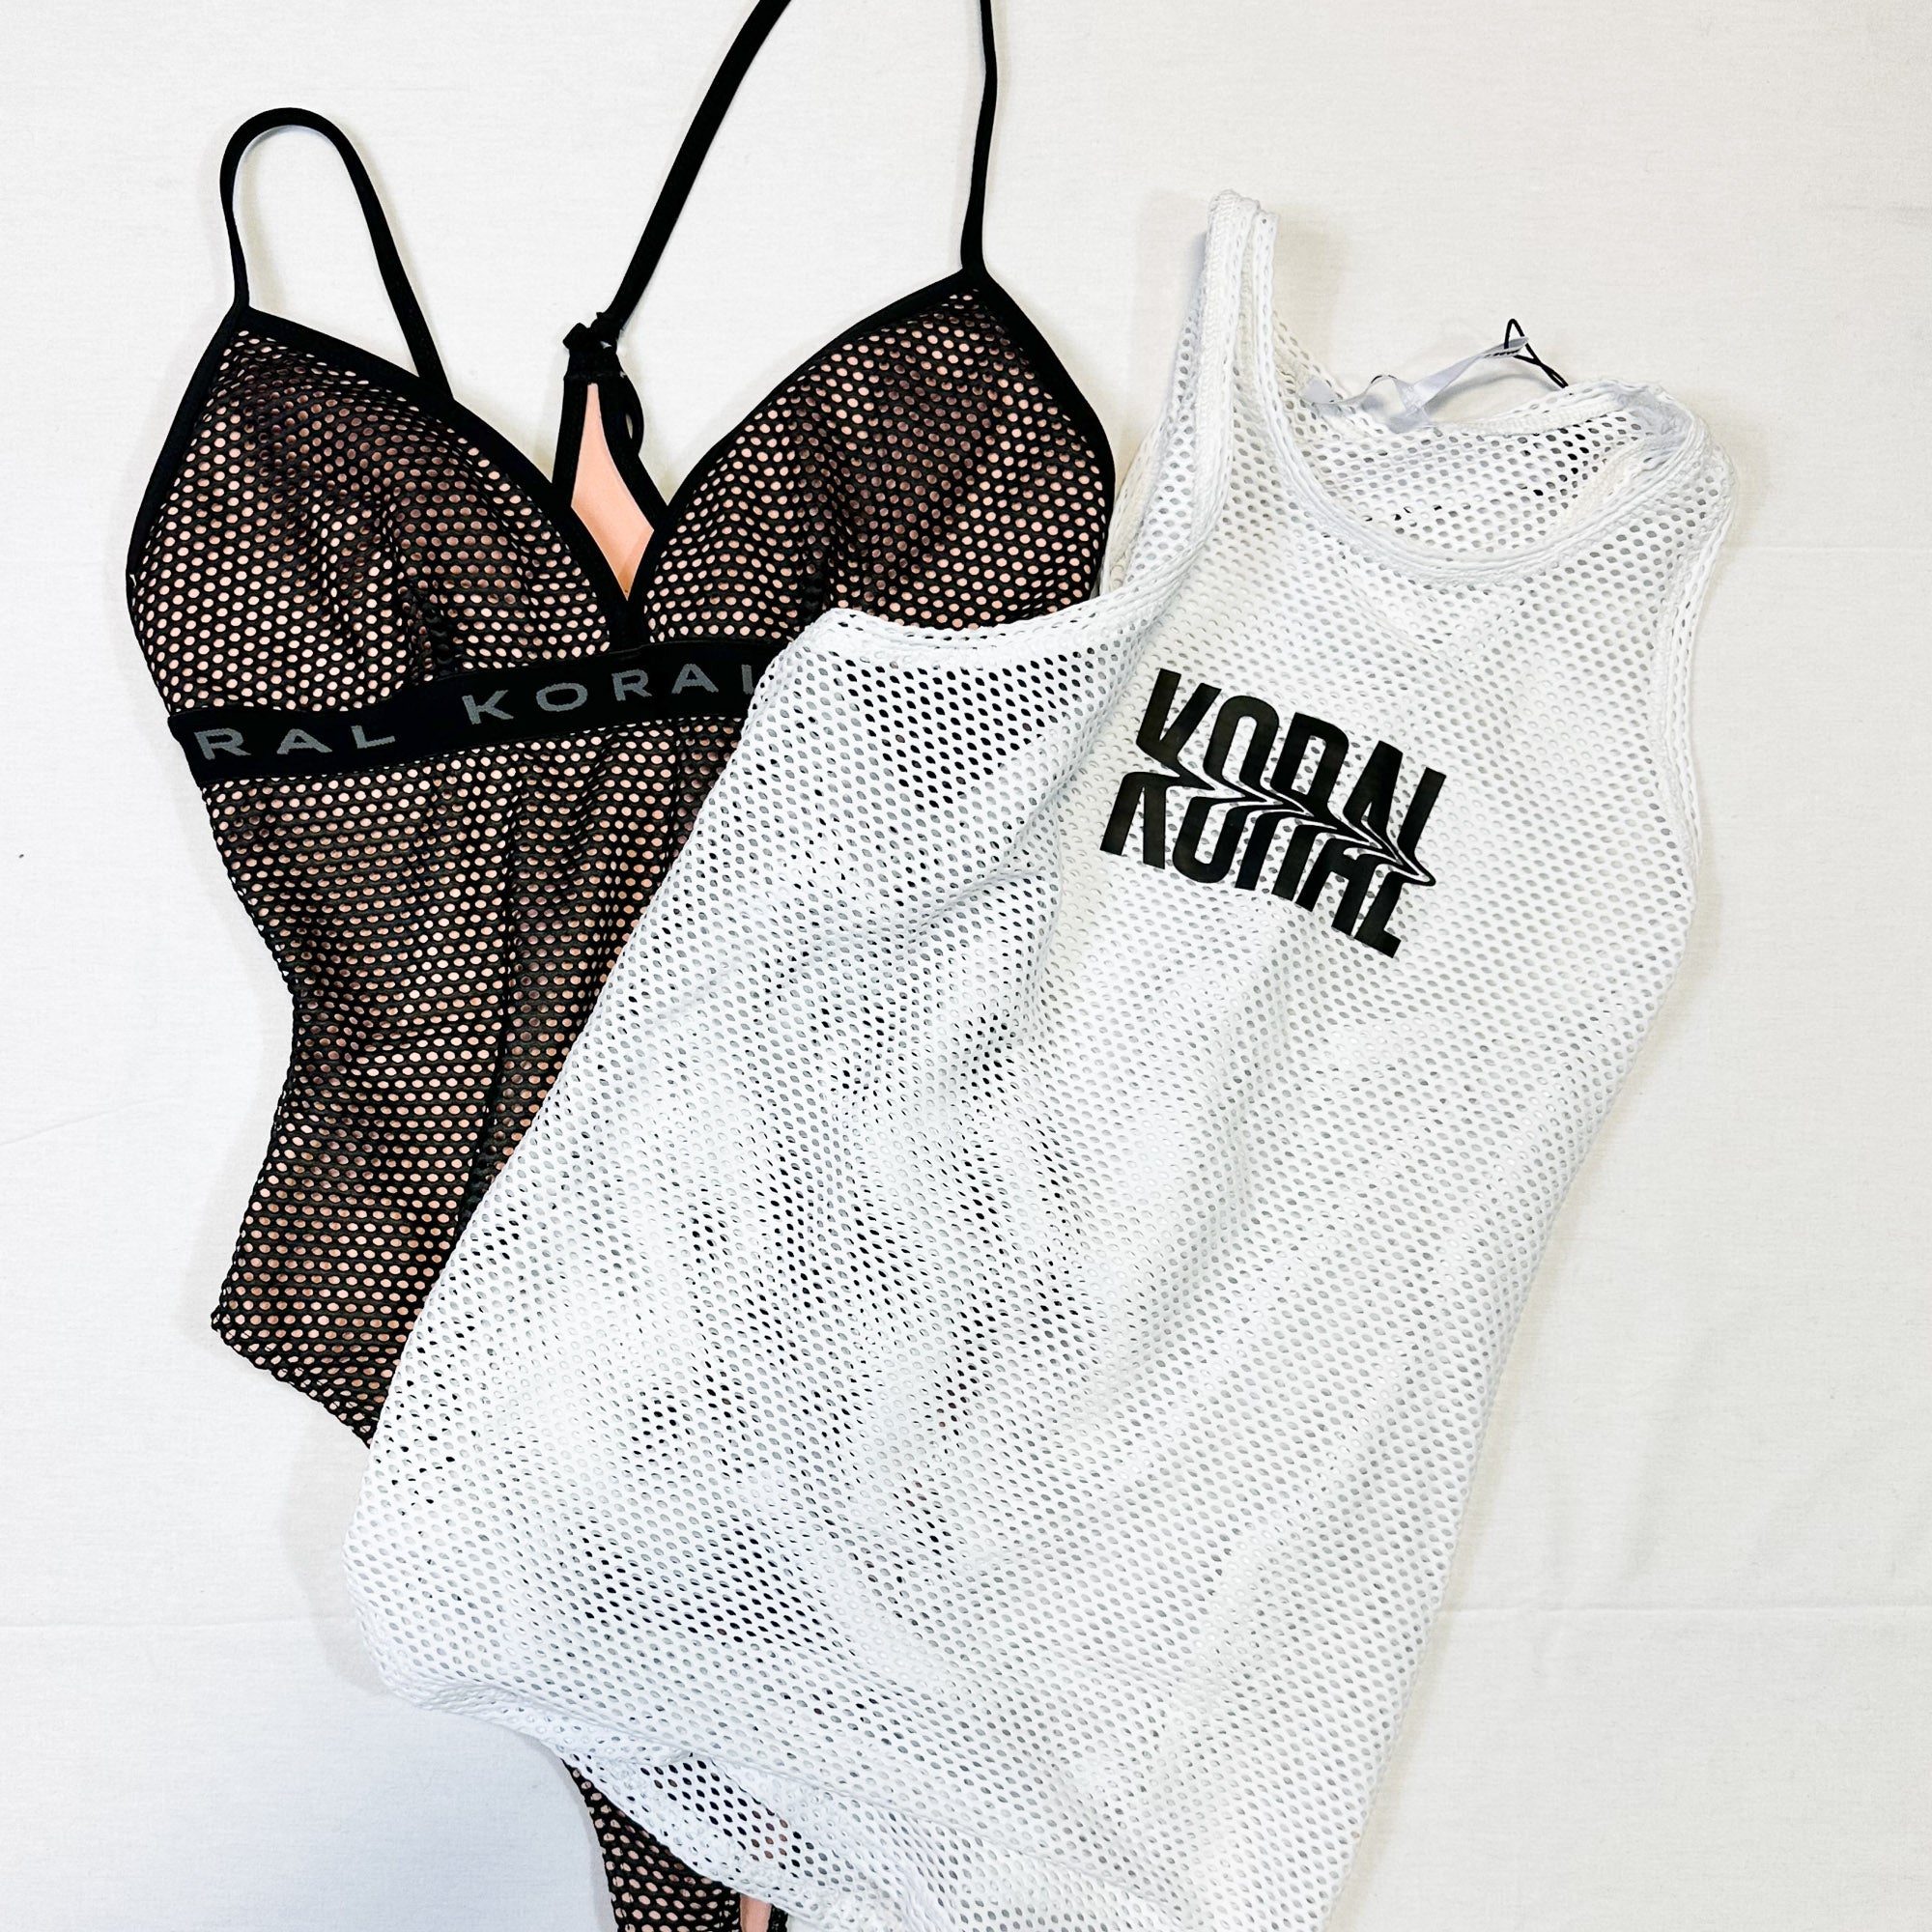 Koral Activewear Women's New Wholesale Boutique By The Box Liquidation Wholesale Clothing Mystery Boxes